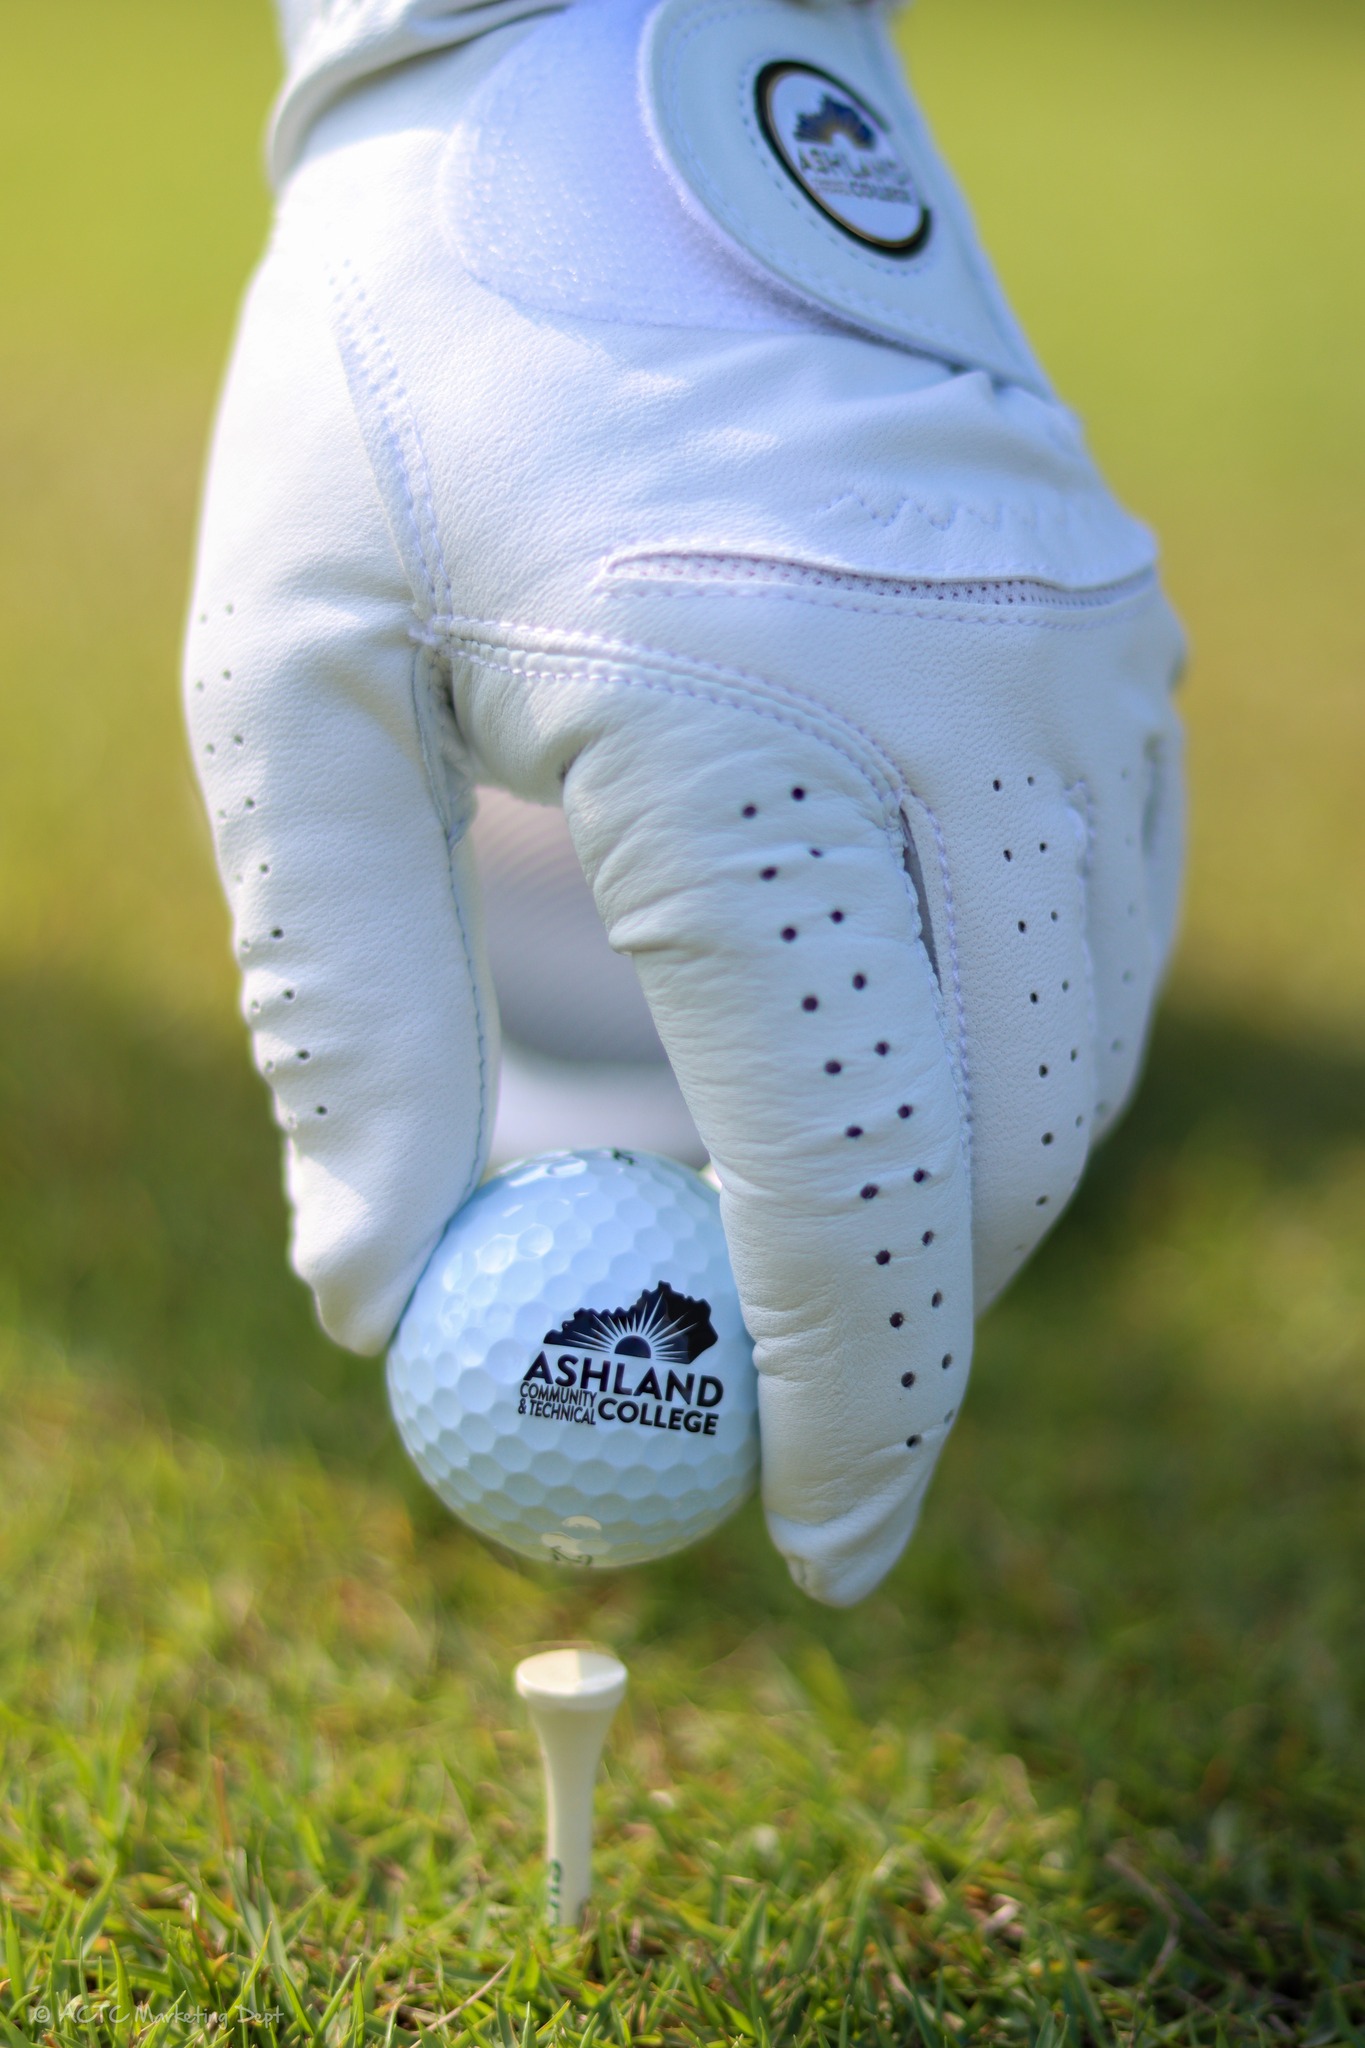 golfers-hand-wearing-white-glove-placing-actc-golf-ball-on-tee